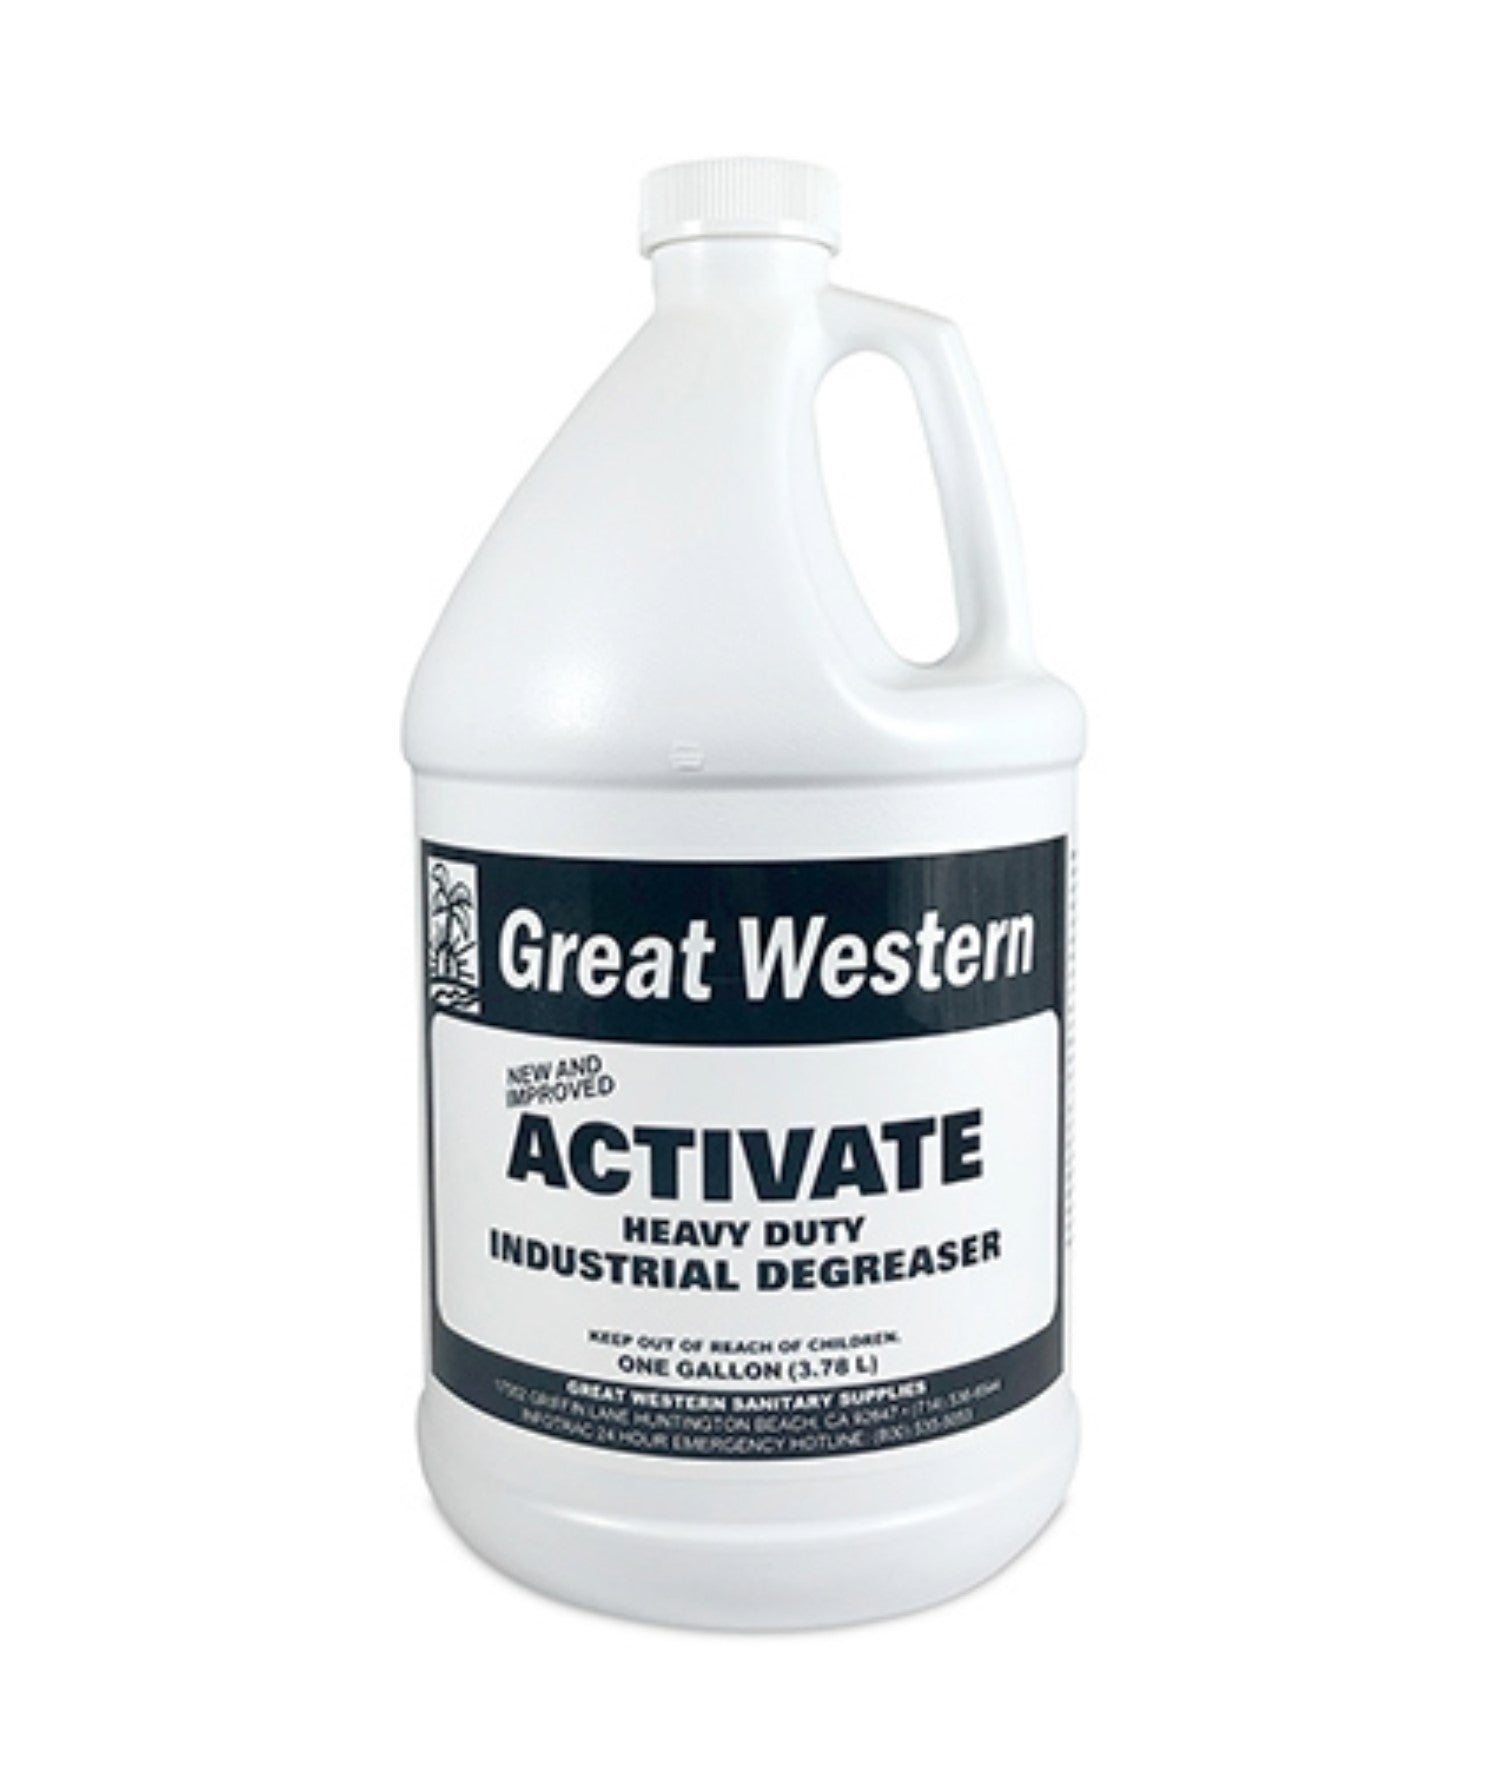 Great Western Activate Heavy Duty Industrial Degreaser